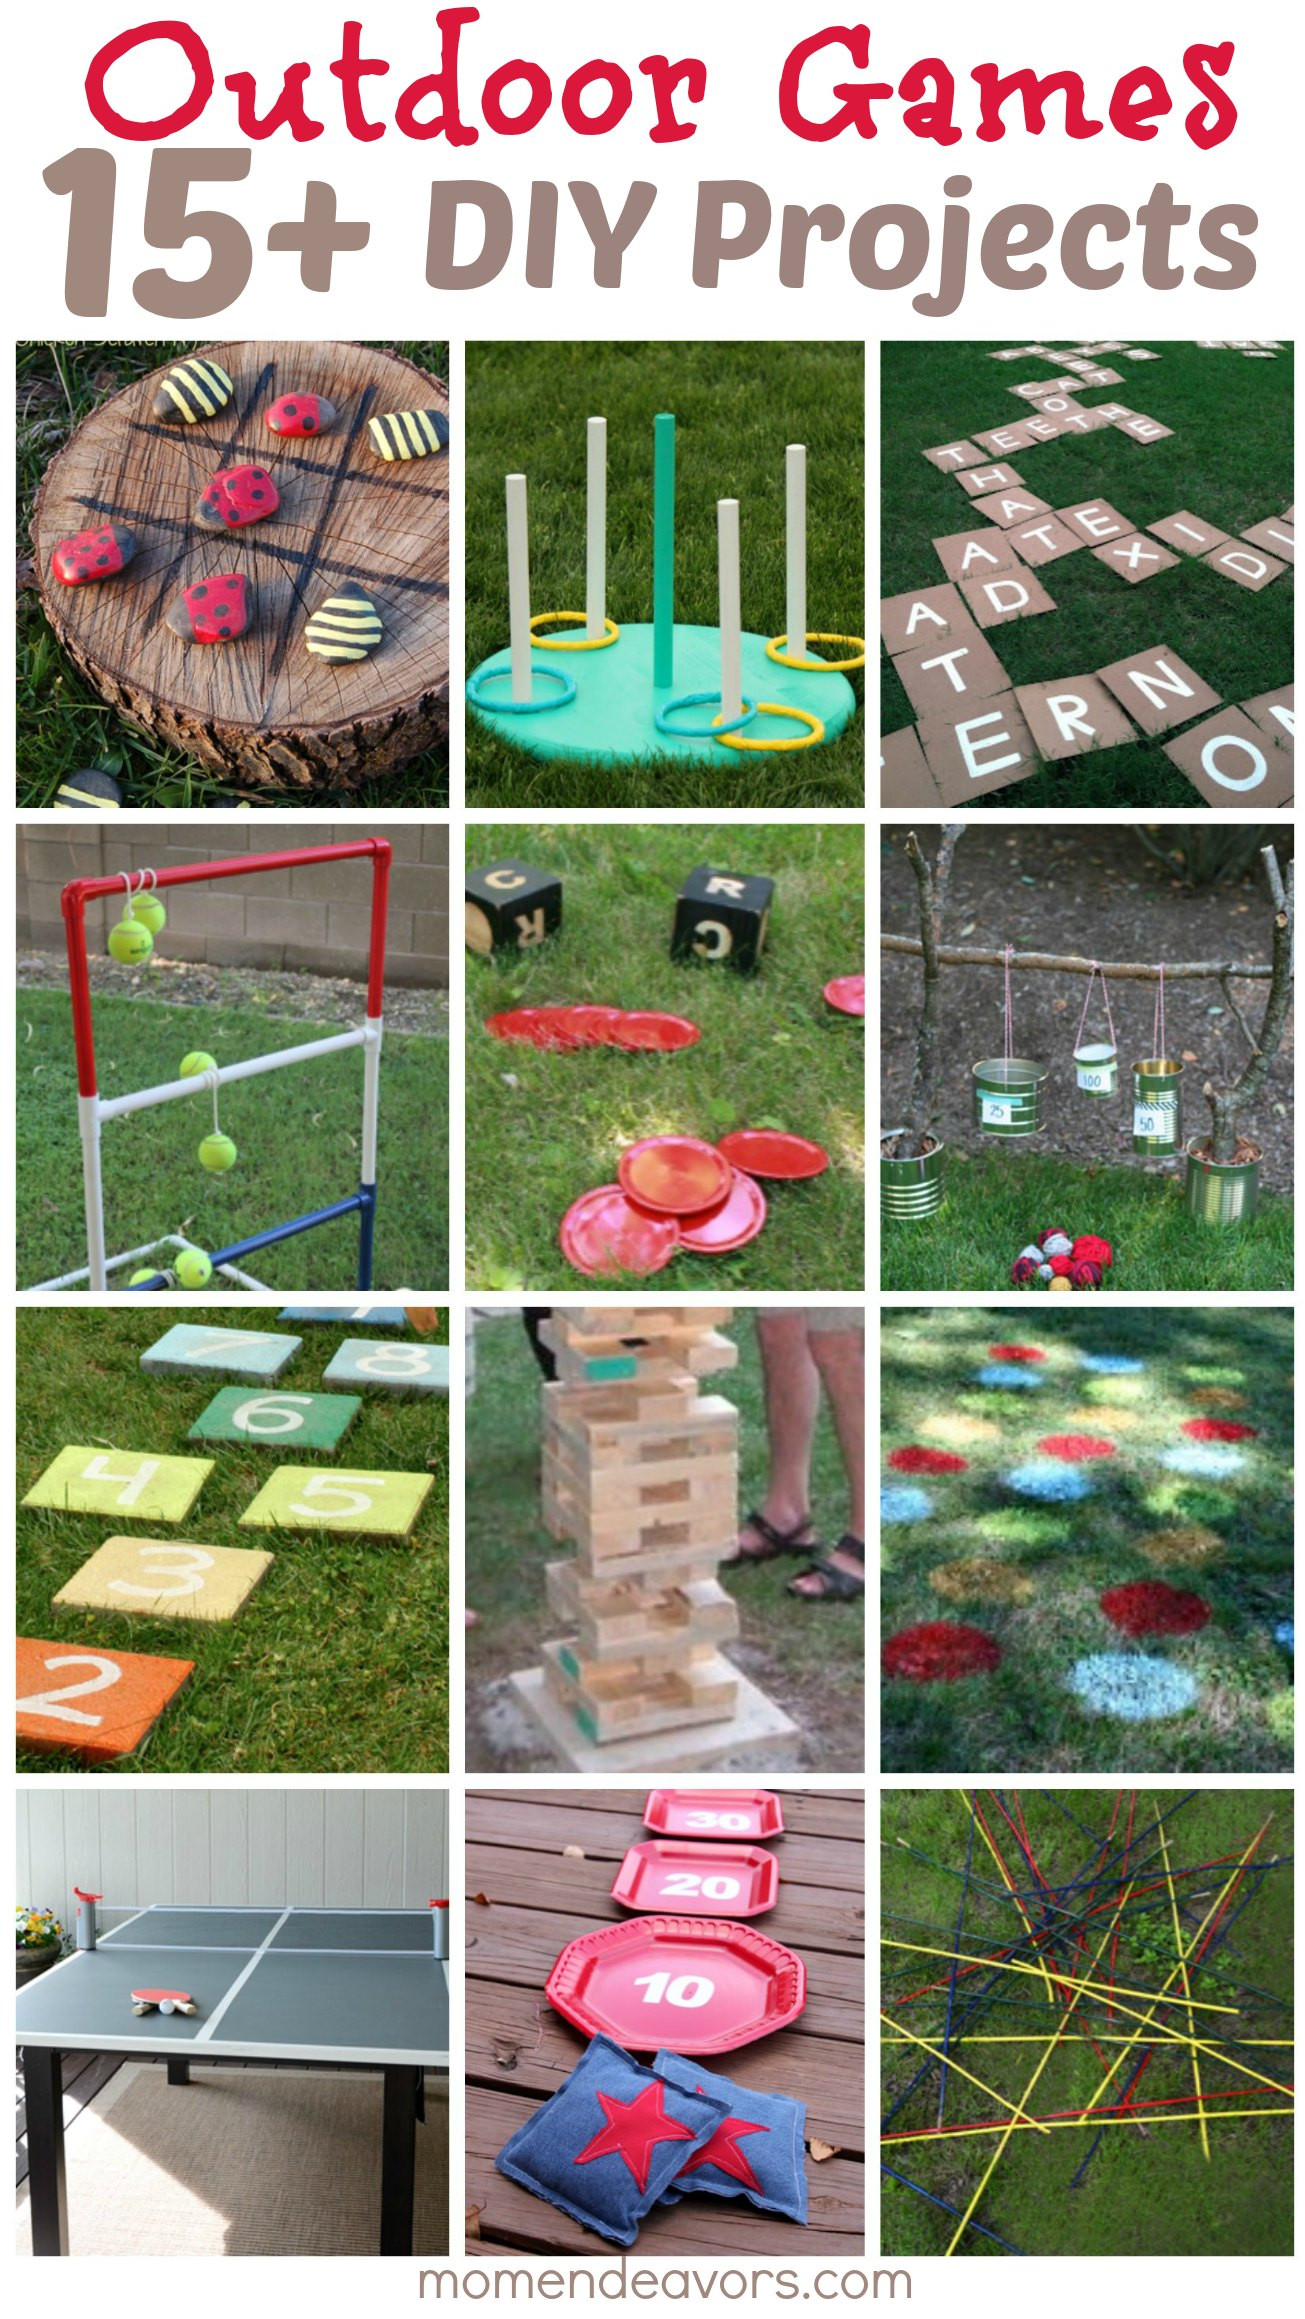 DIY Outdoor Games
 DIY Outdoor Games – 15 Awesome Project Ideas for Backyard